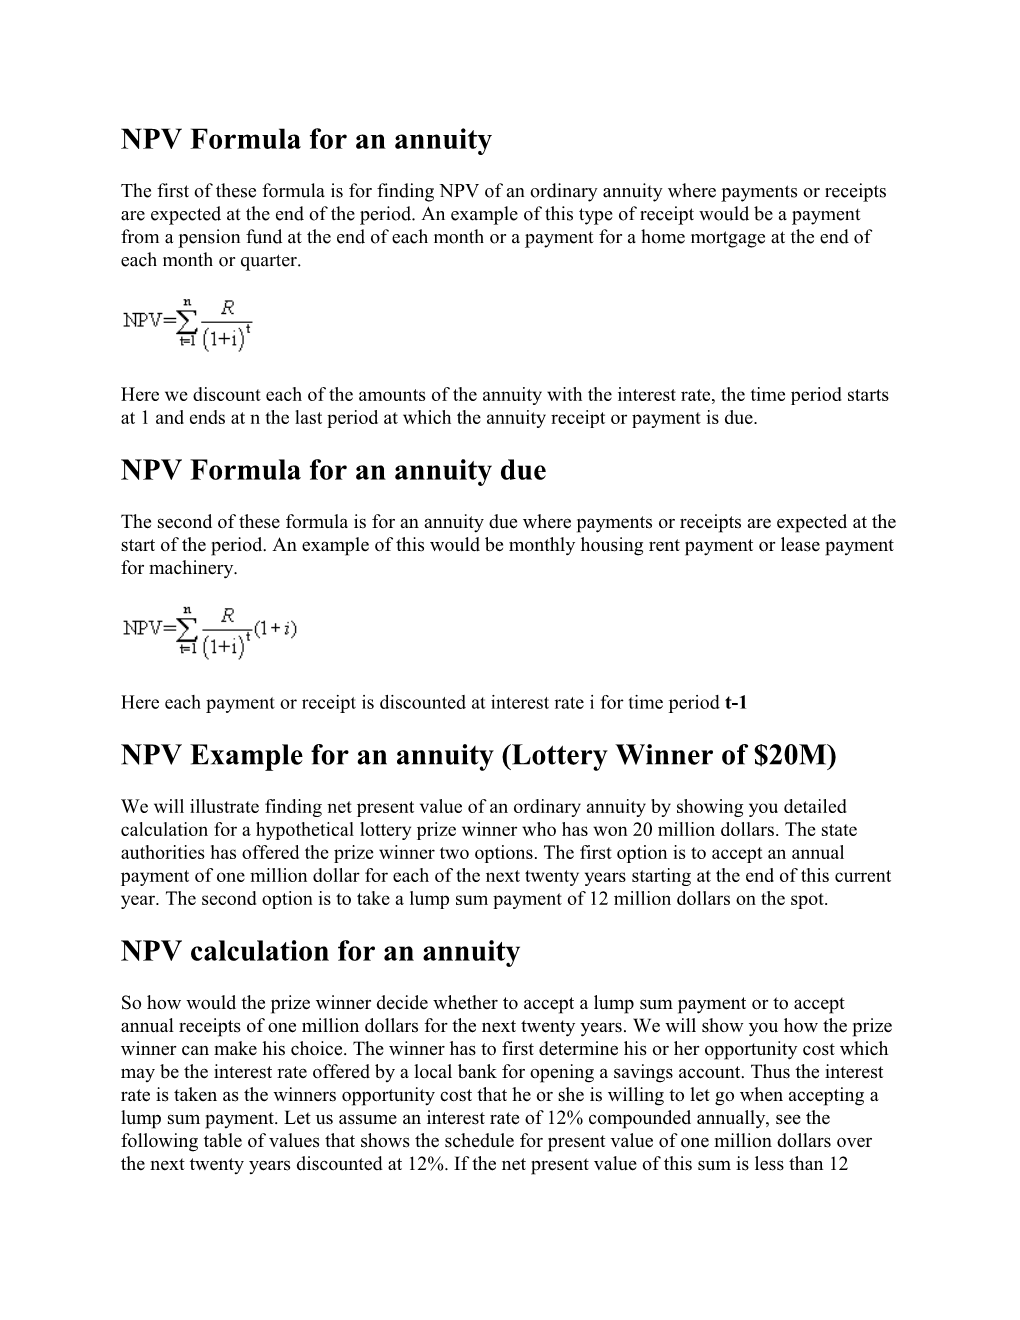 NPV Formula for an Annuity